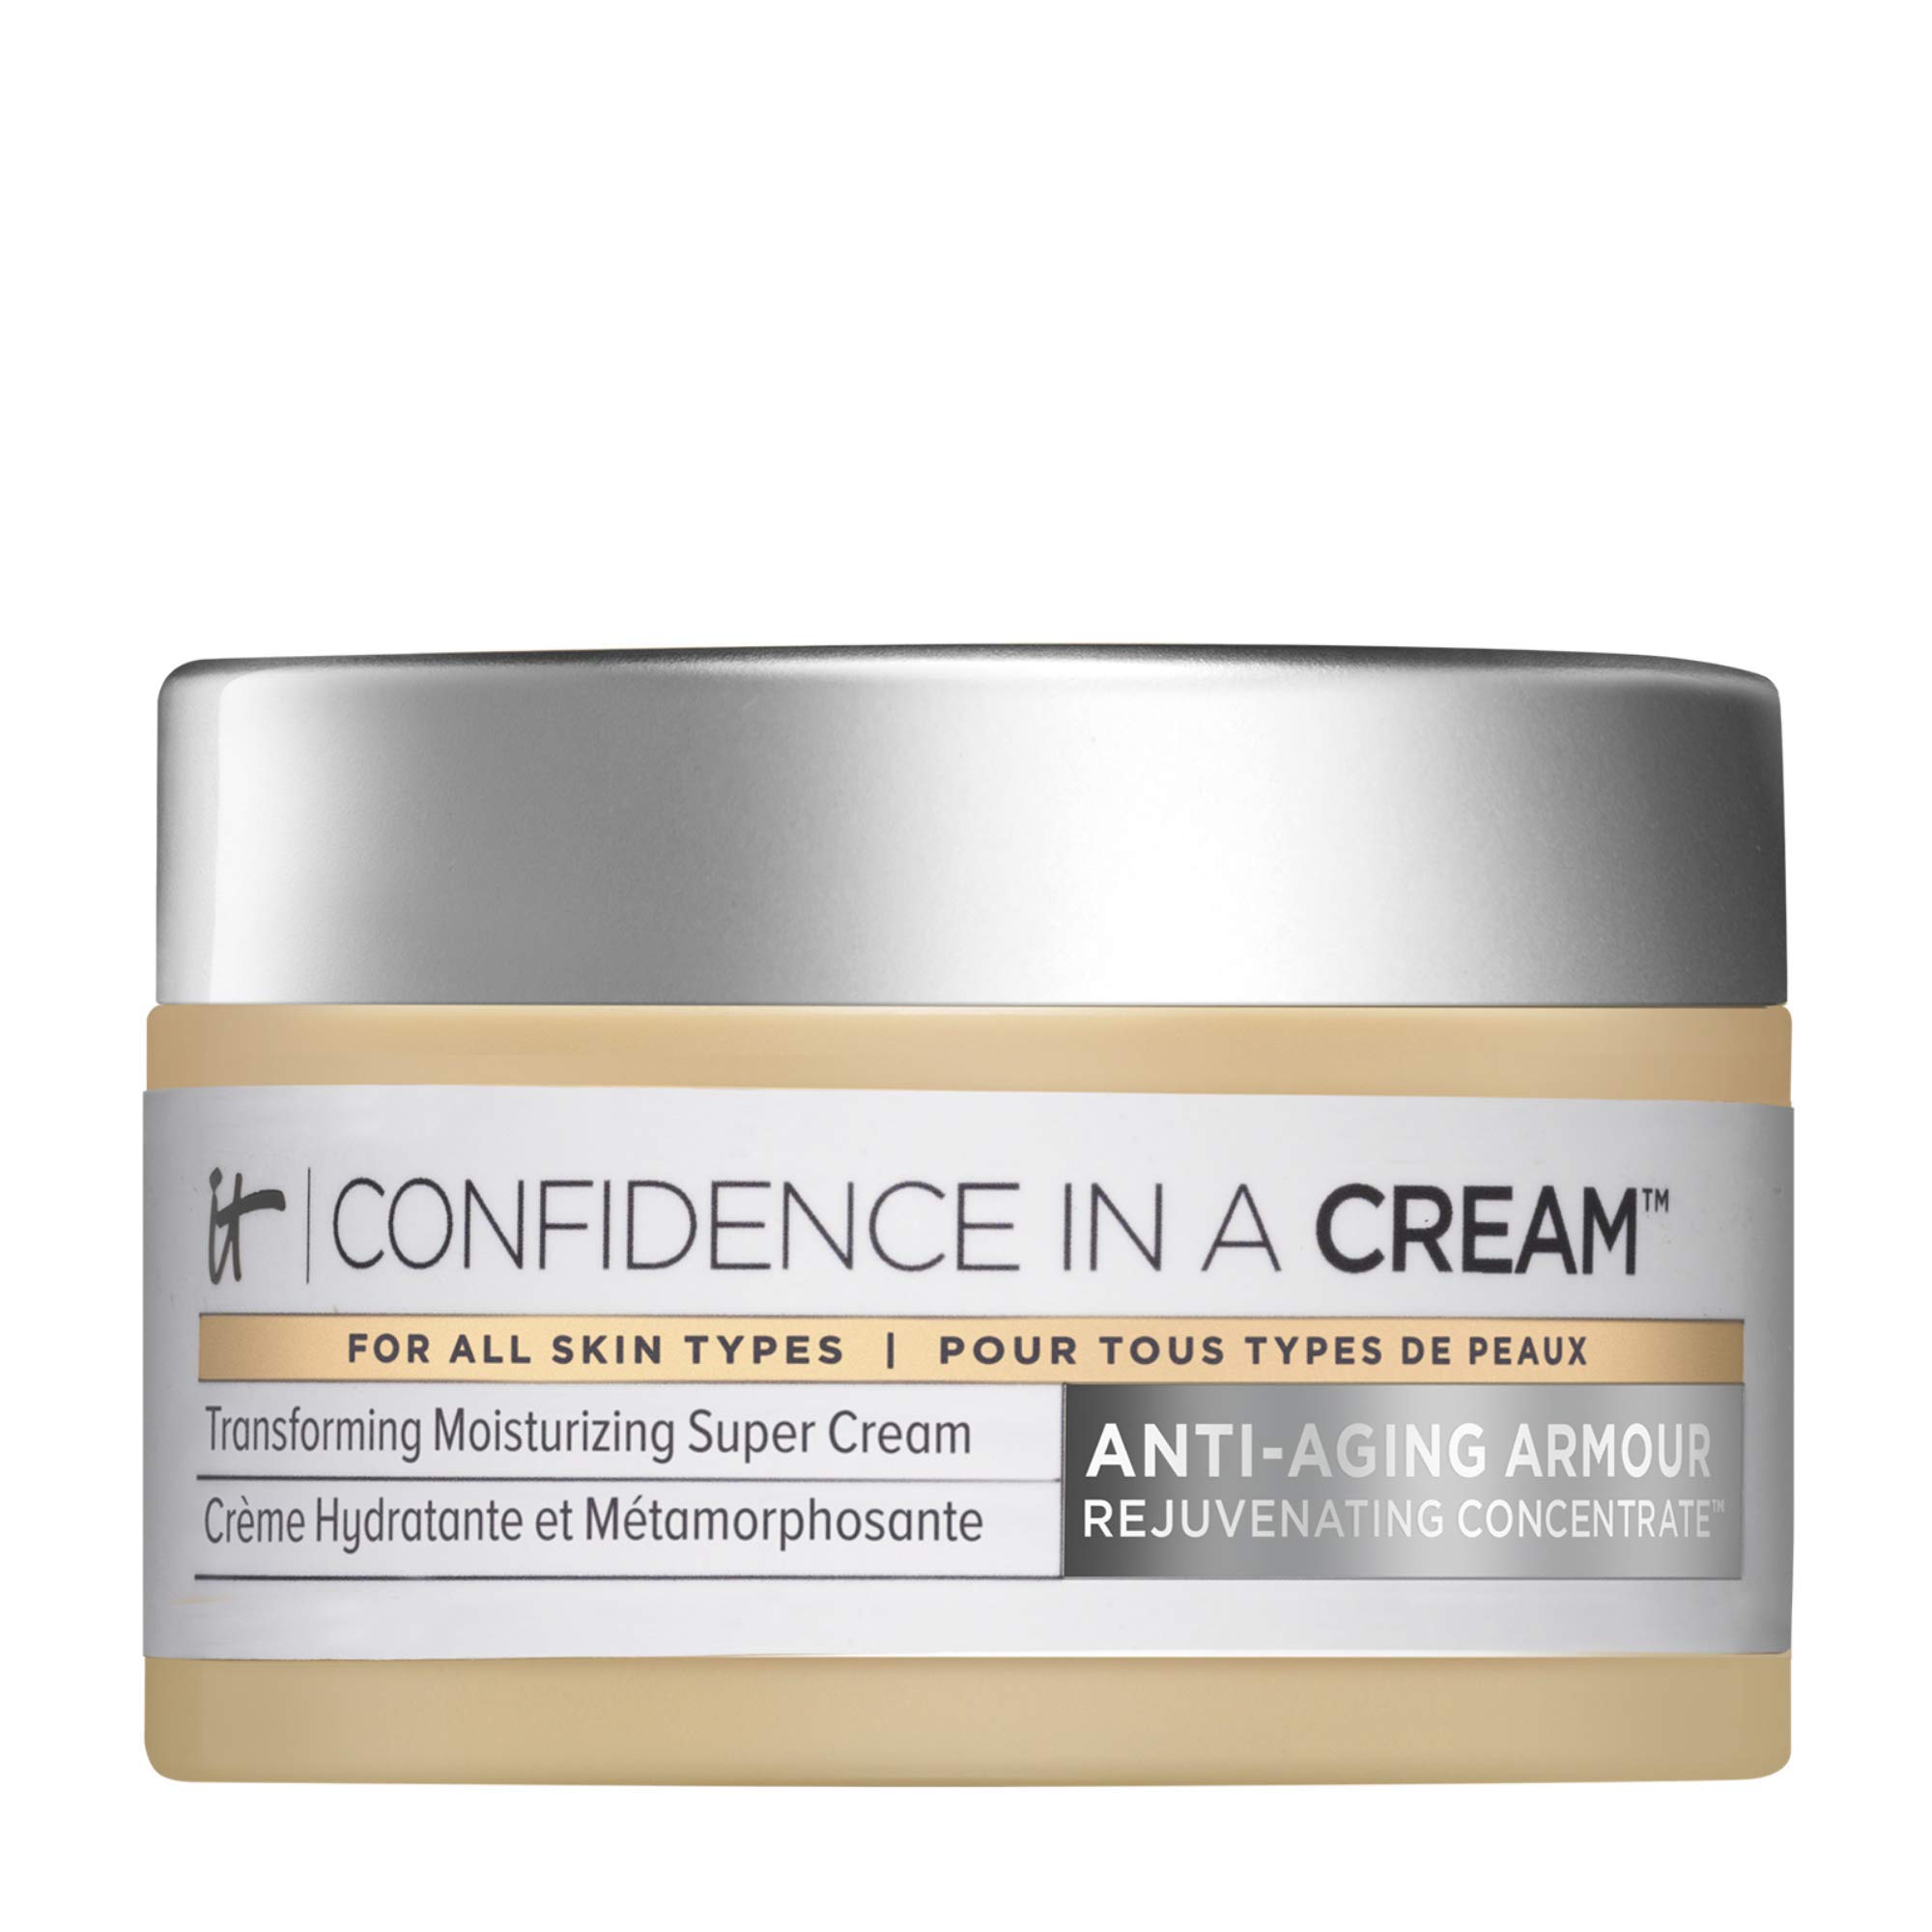 it COSMETICS Confidence In A Cream Facial Moisturizer - Reduces The Look Of Wrinkles & Pores Visibly Brightens Skin With Hyaluronic Acid Collagen Fl Oz